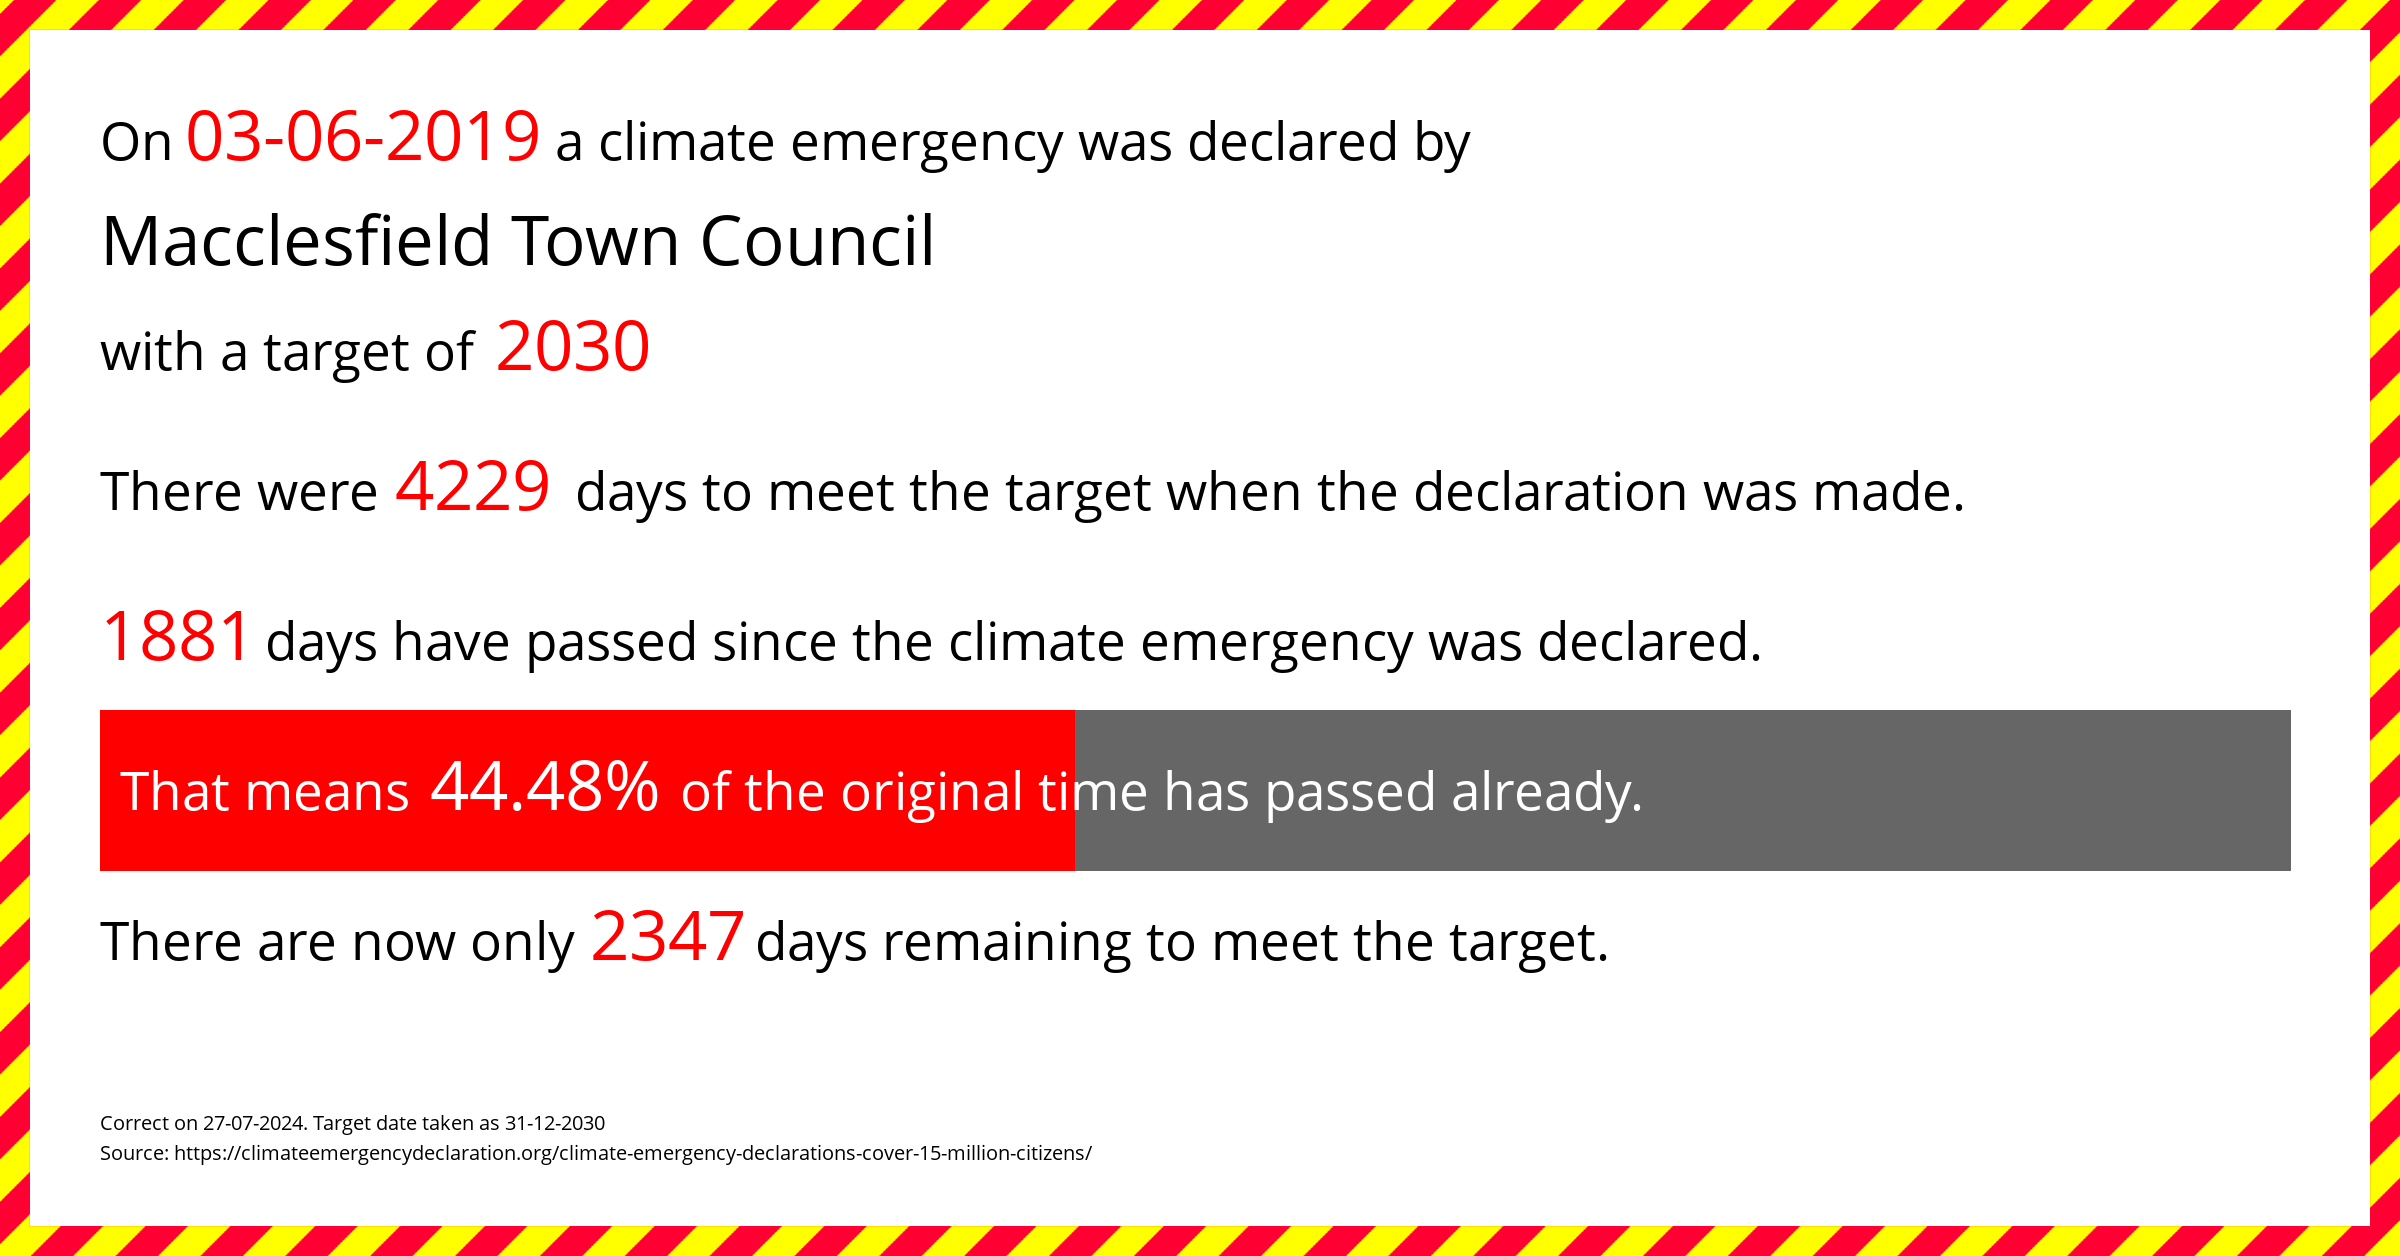 Macclesfield Town Council declared a Climate emergency on Monday 3rd June 2019, with a target of 2030.